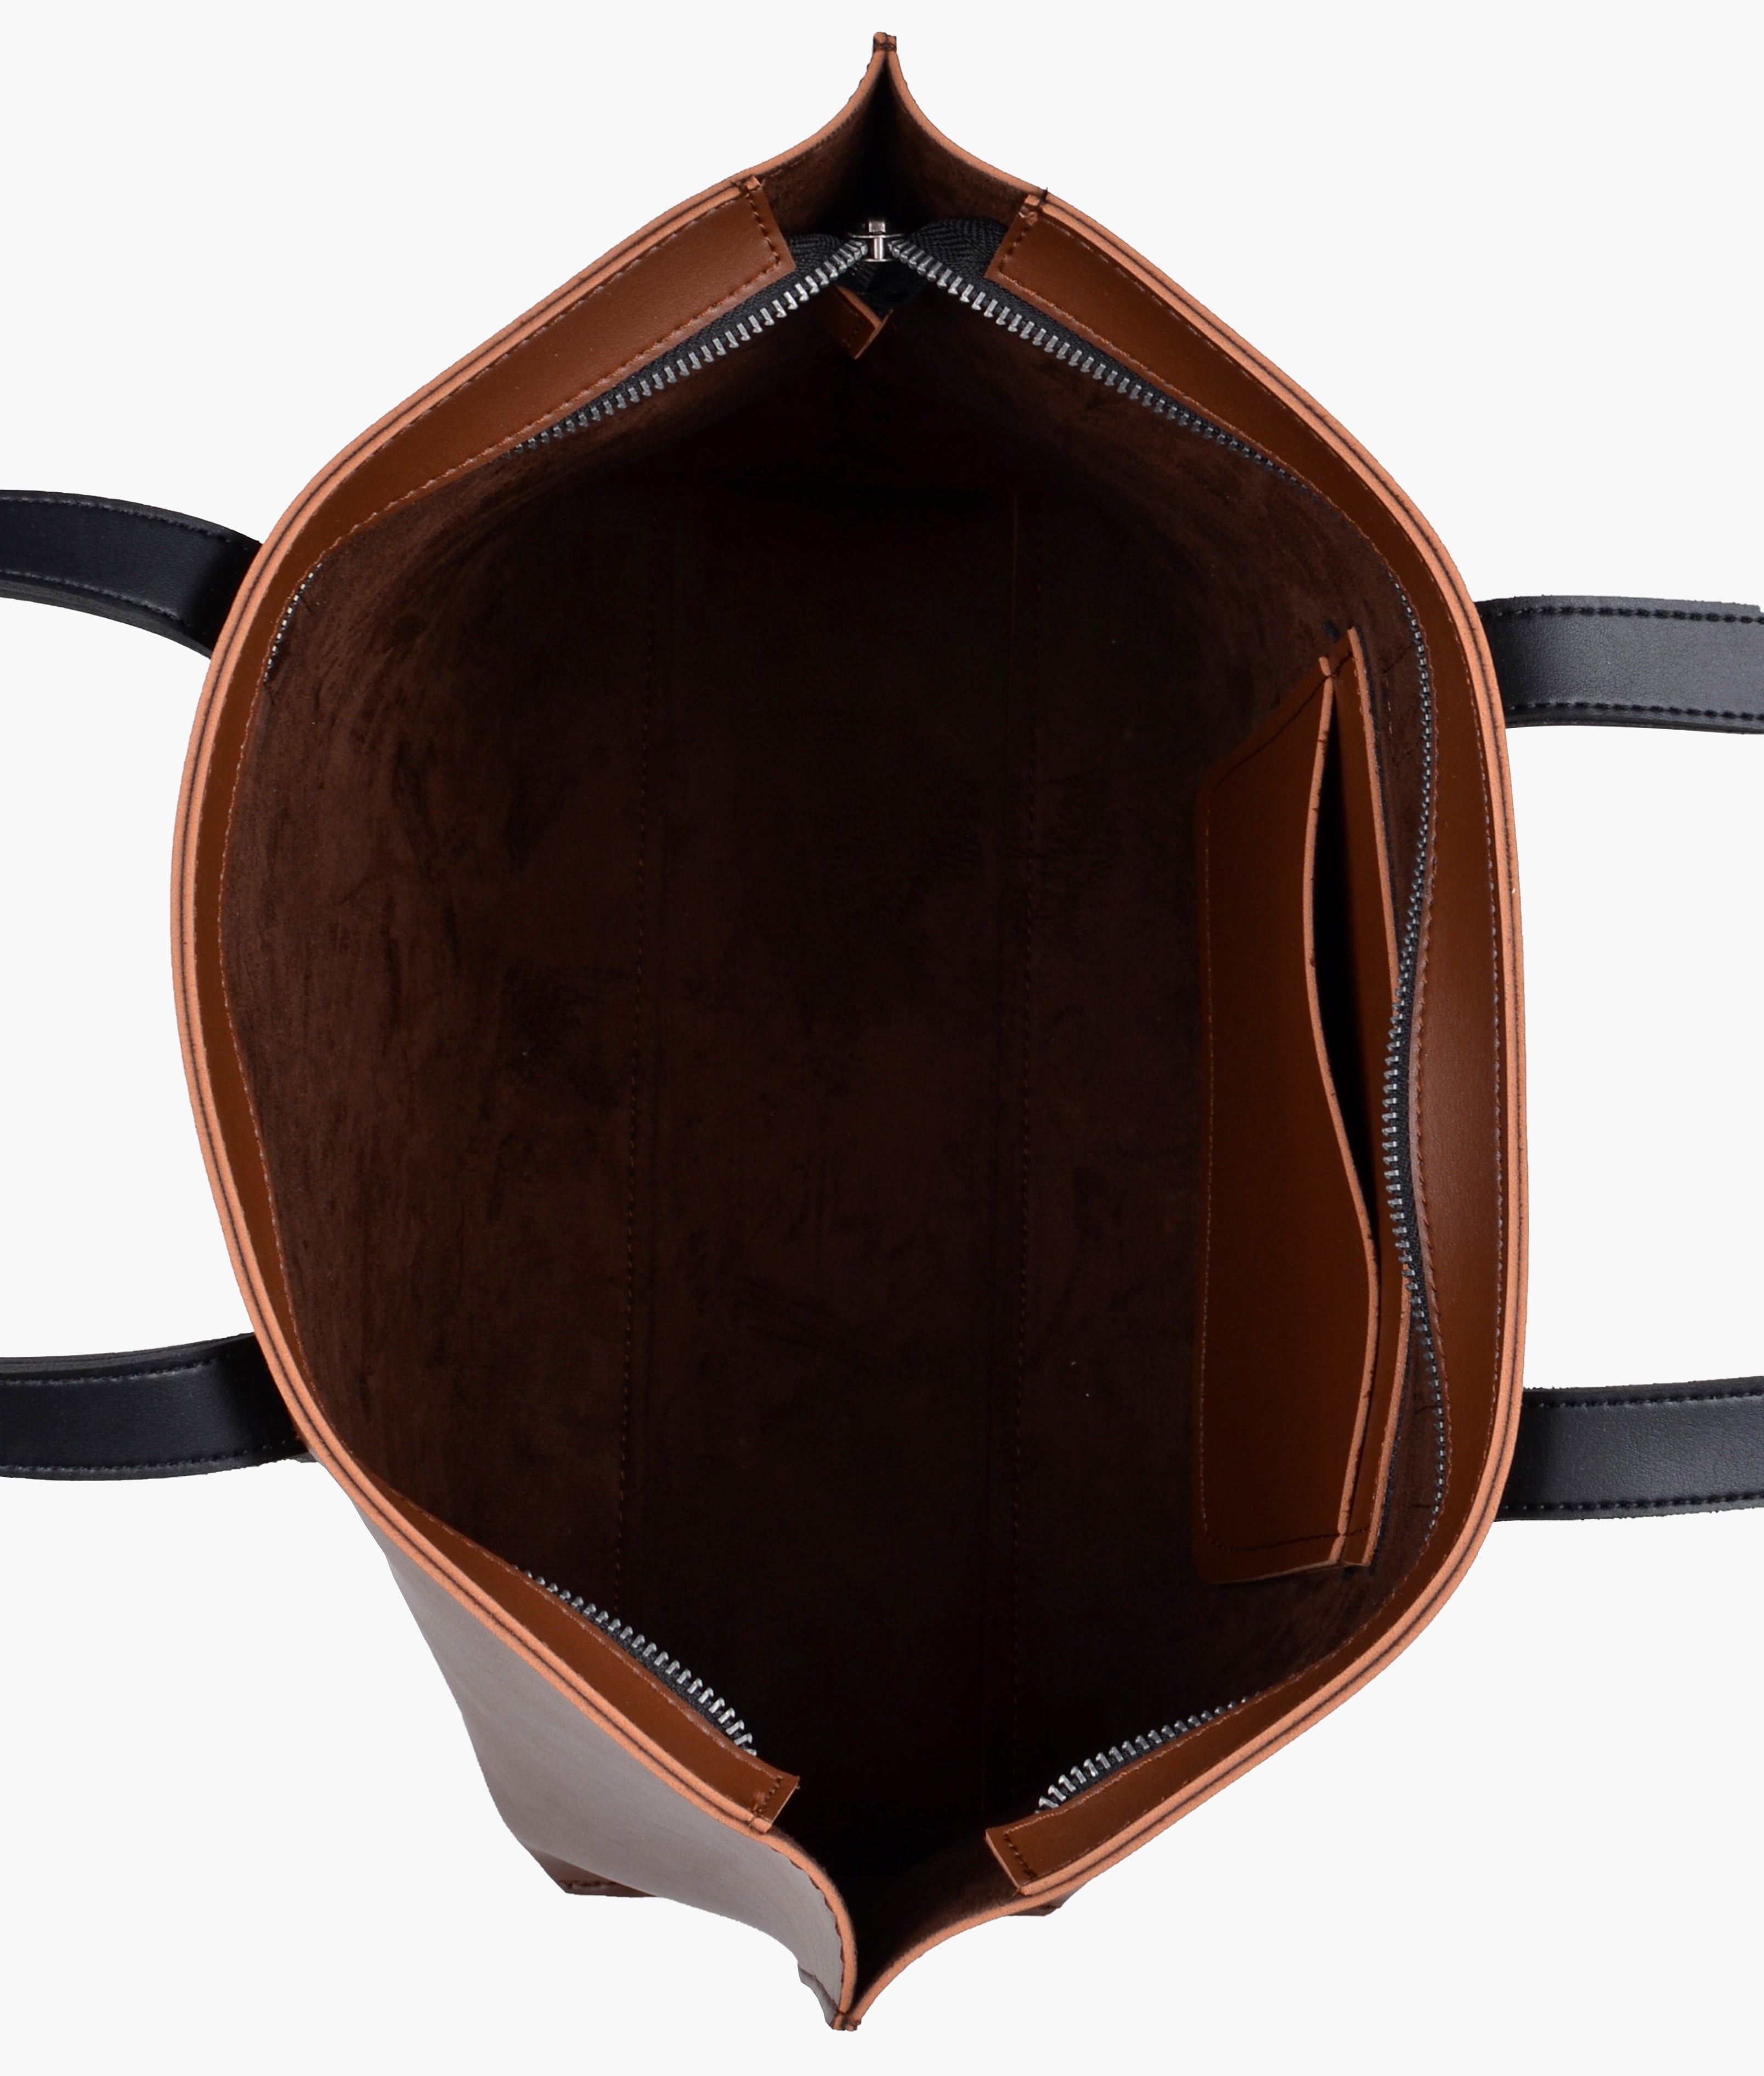 Horse brown with black long handle tote bag